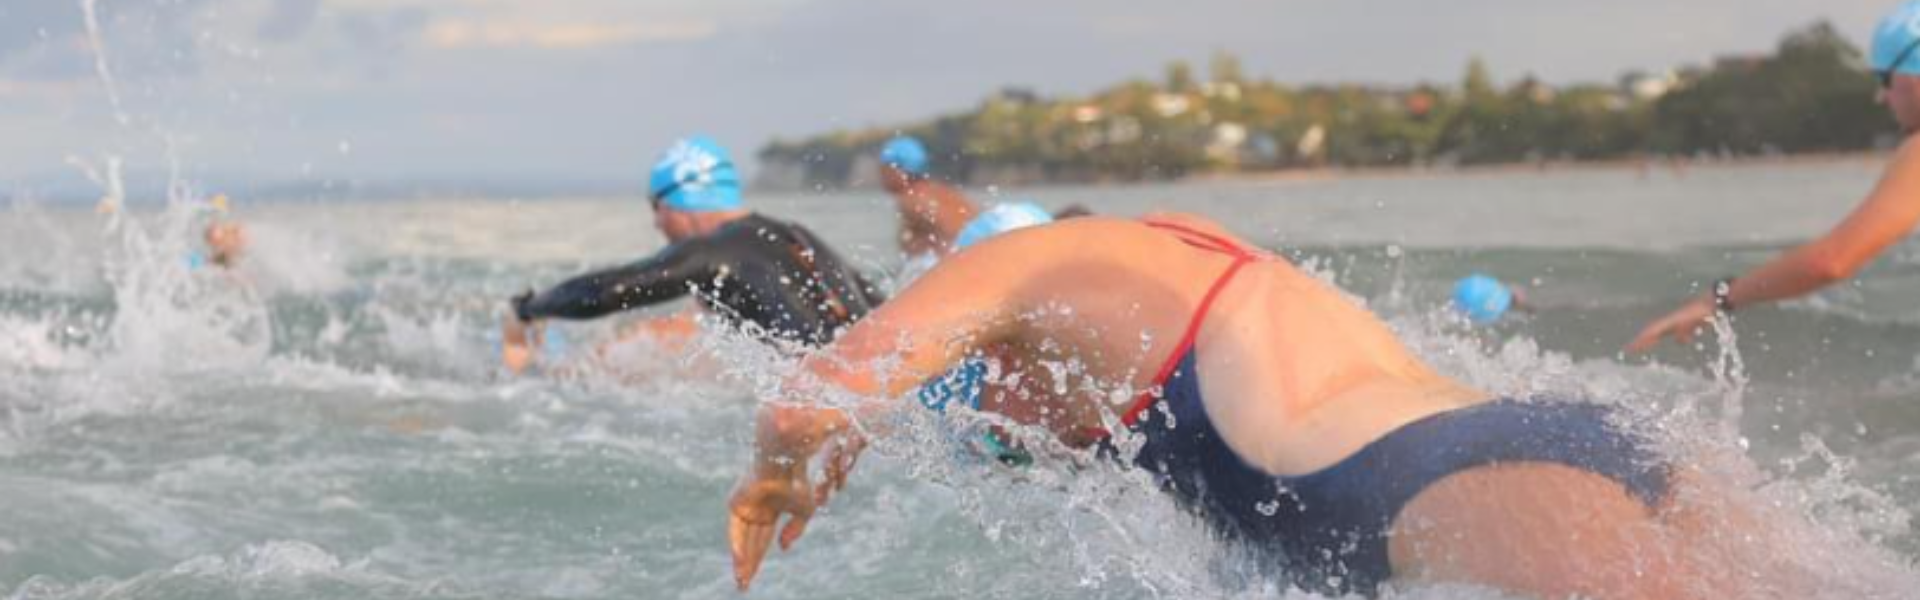 How can equipment help your open water swimming?